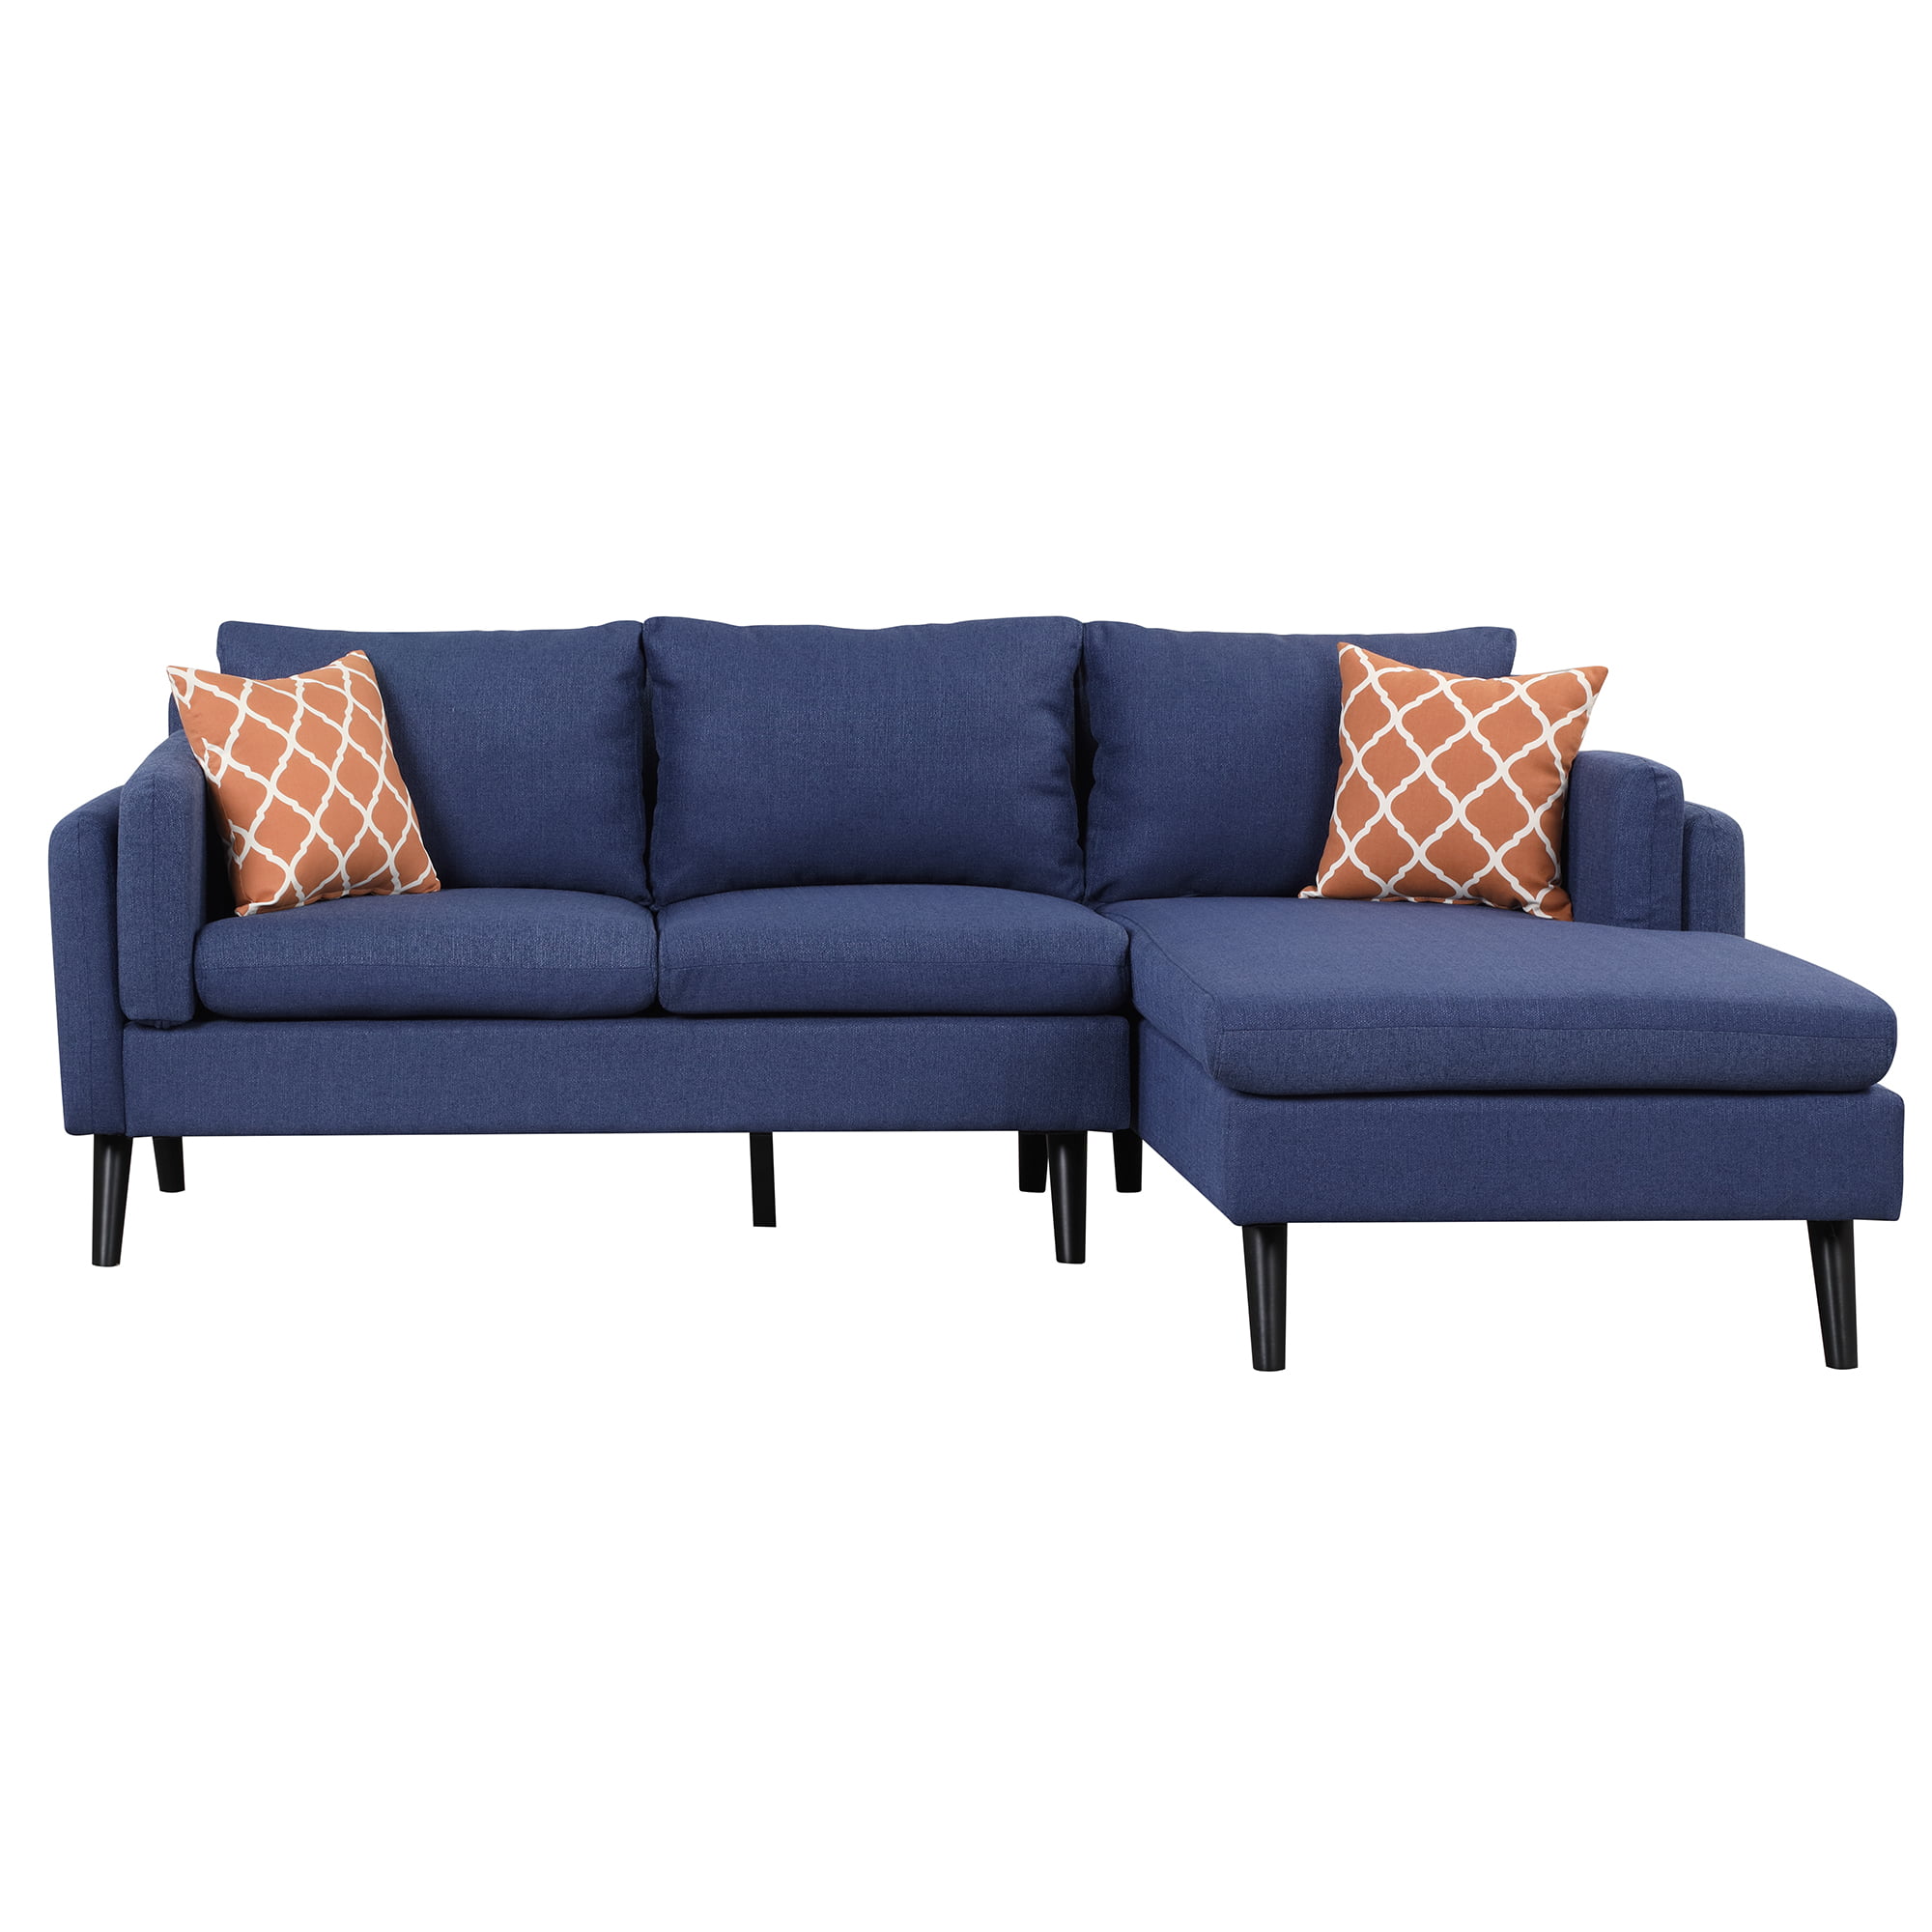 Upholstered L-Shape Sofa Couch with Chaise and 2 Pillows - SG000680AAC